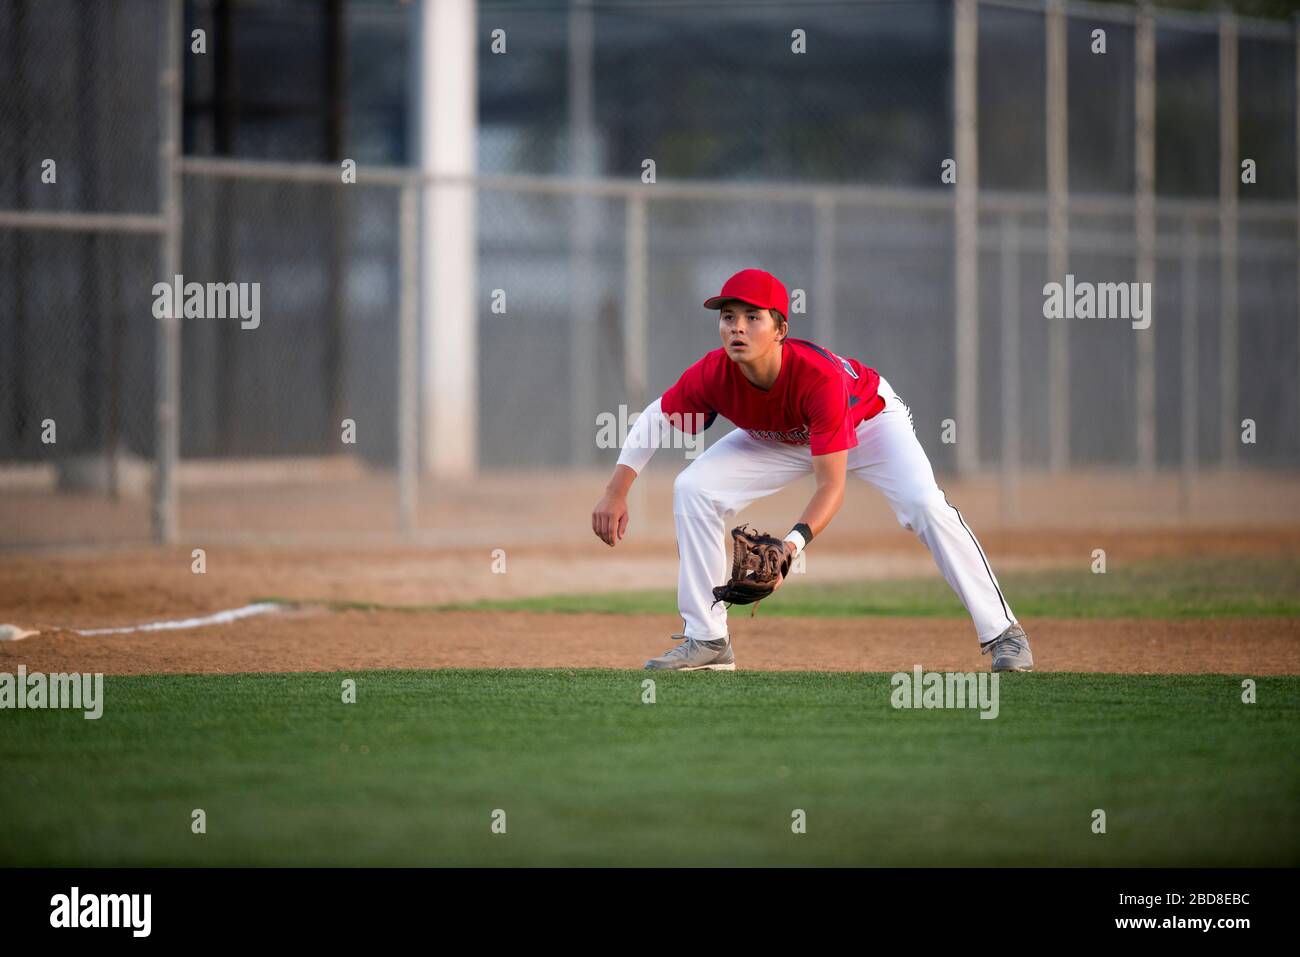 Teen baseball player in red uniform ready for a ground ball Stock Photo